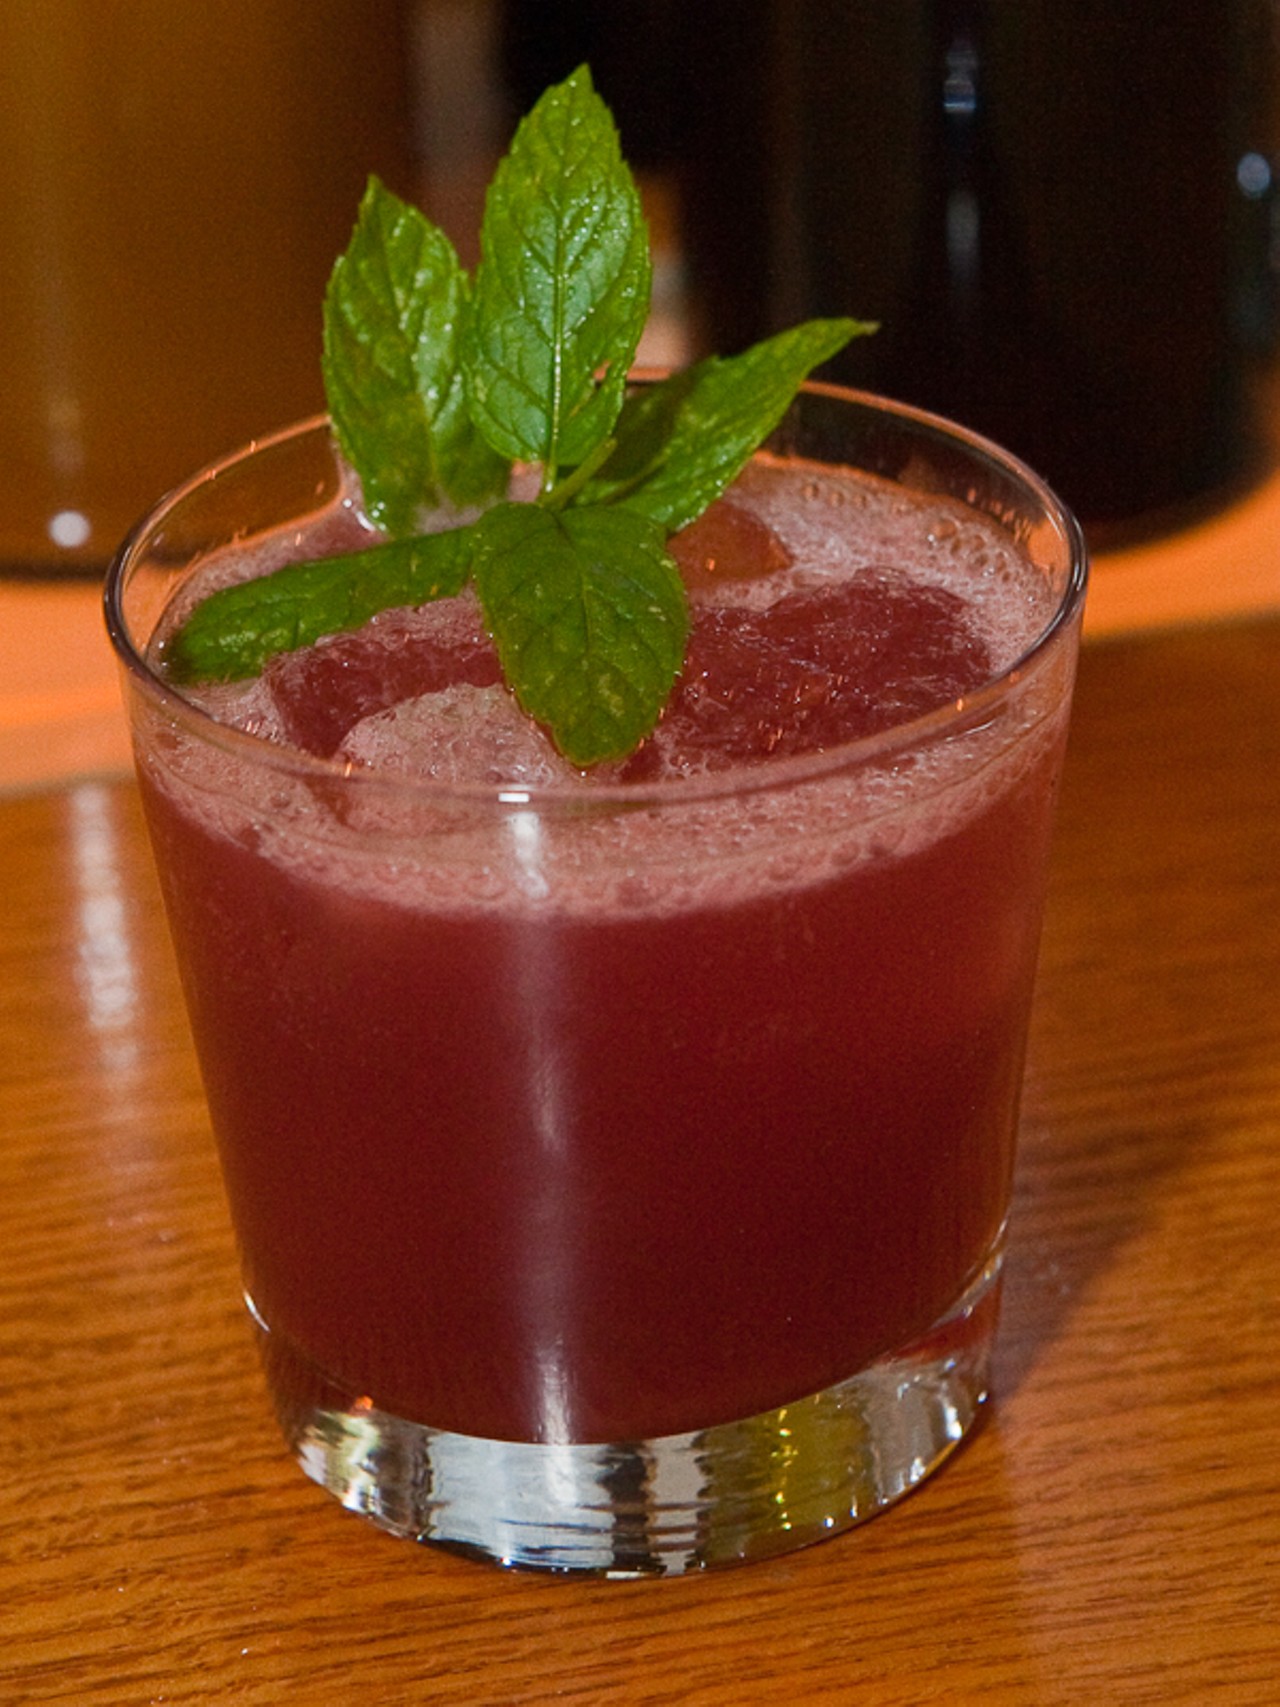 "Bramble On," created by Ted Kilgore of Taste by Niche.